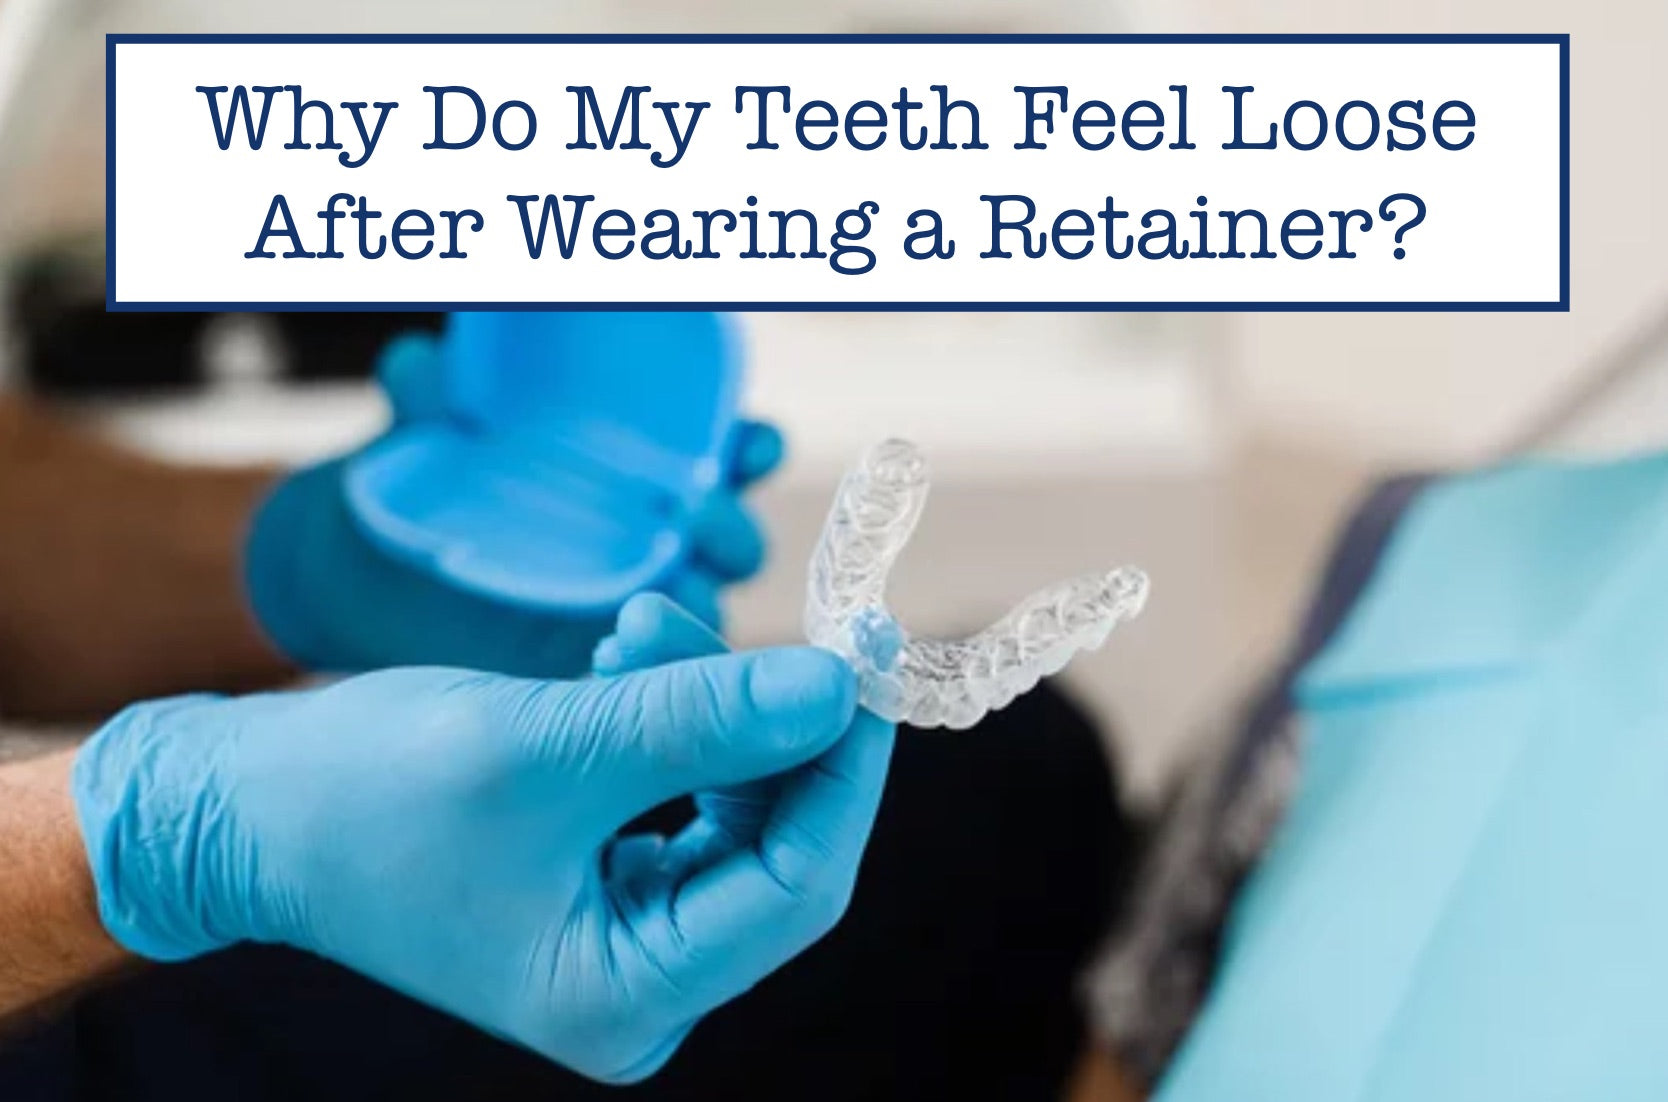 Why Do My Teeth Feel Loose After Wearing a Retainer?